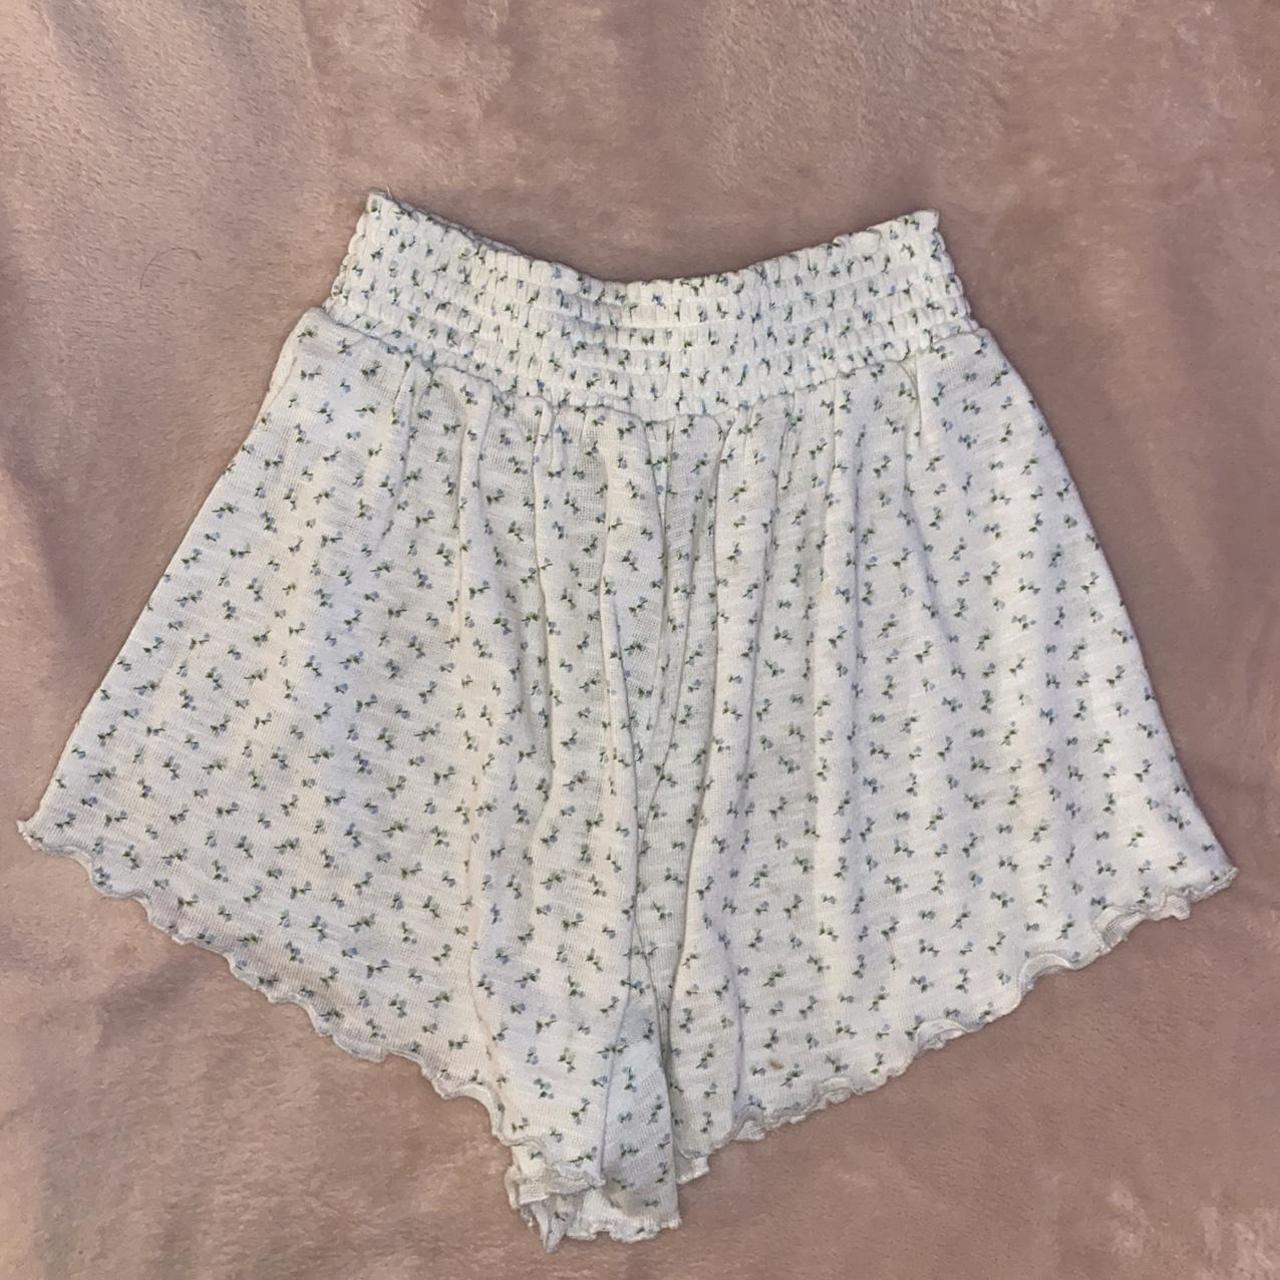 Floral sleep shorts Fairy vibes so cute 🧚🏾‍♀️ Will fit - Depop